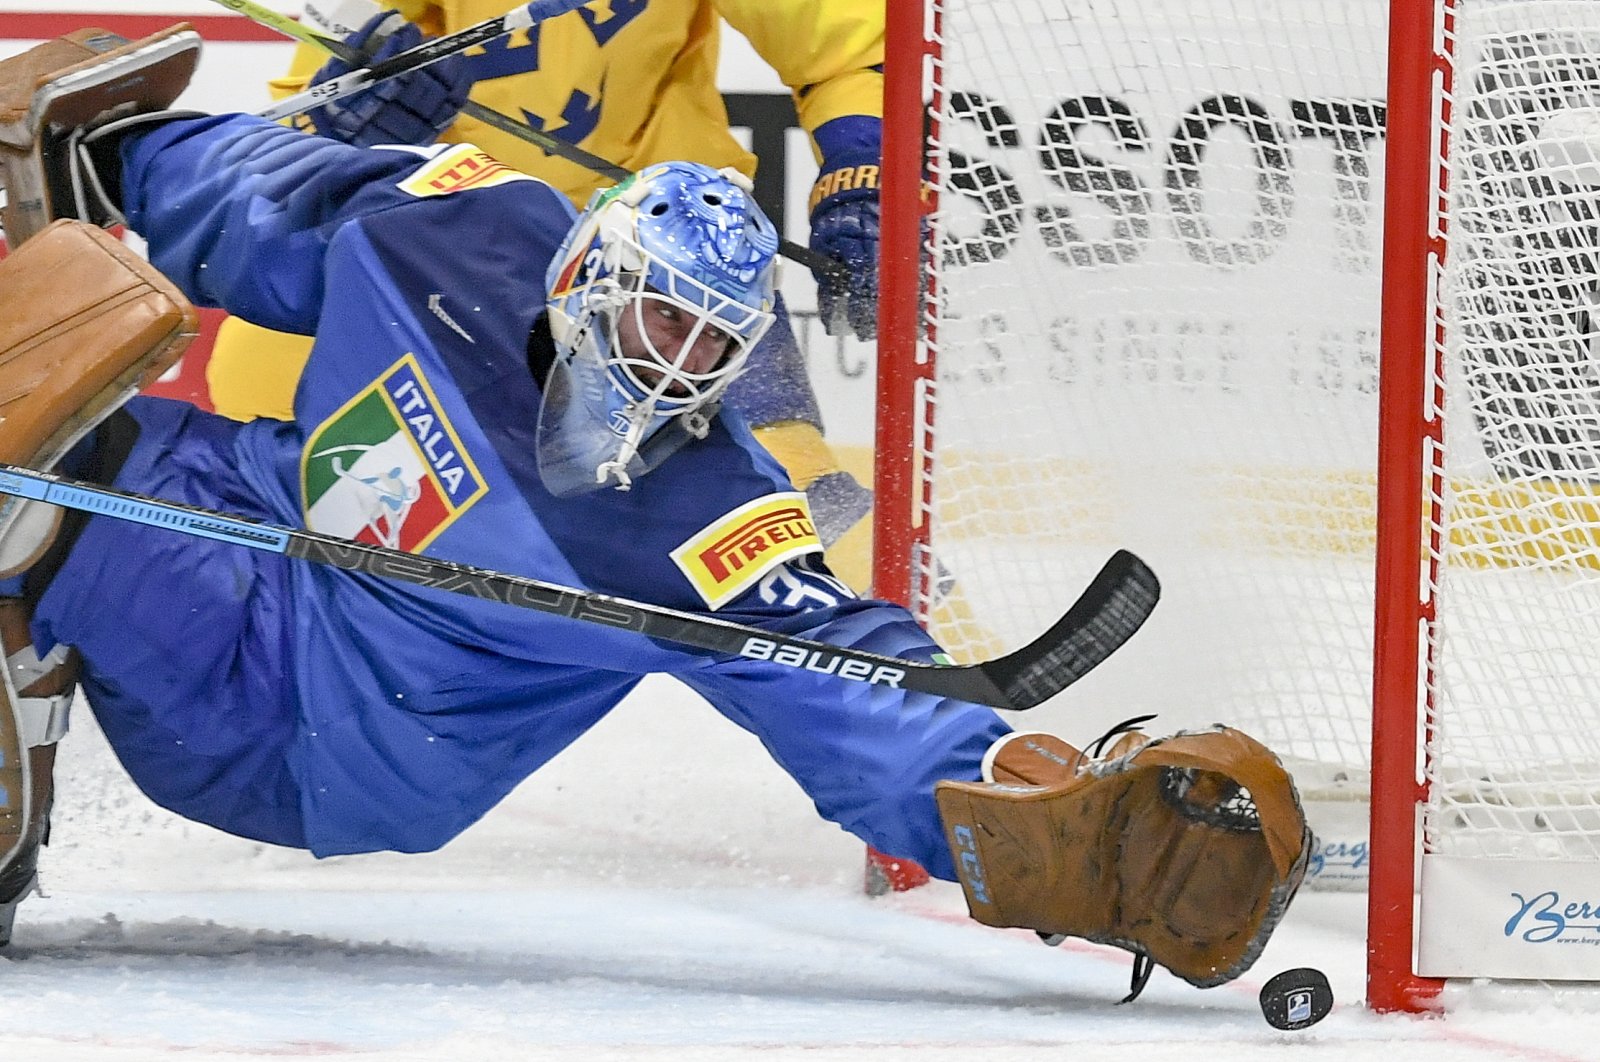 Goalkeeper Marco De Filippo Roia of Italy in action during the IIHF World Championship group B ice hockey match between Italy and Sweden at the Ondrej Nepela Arena in Bratislava, Slovakia, May 12, 2019. (EPA Photo)